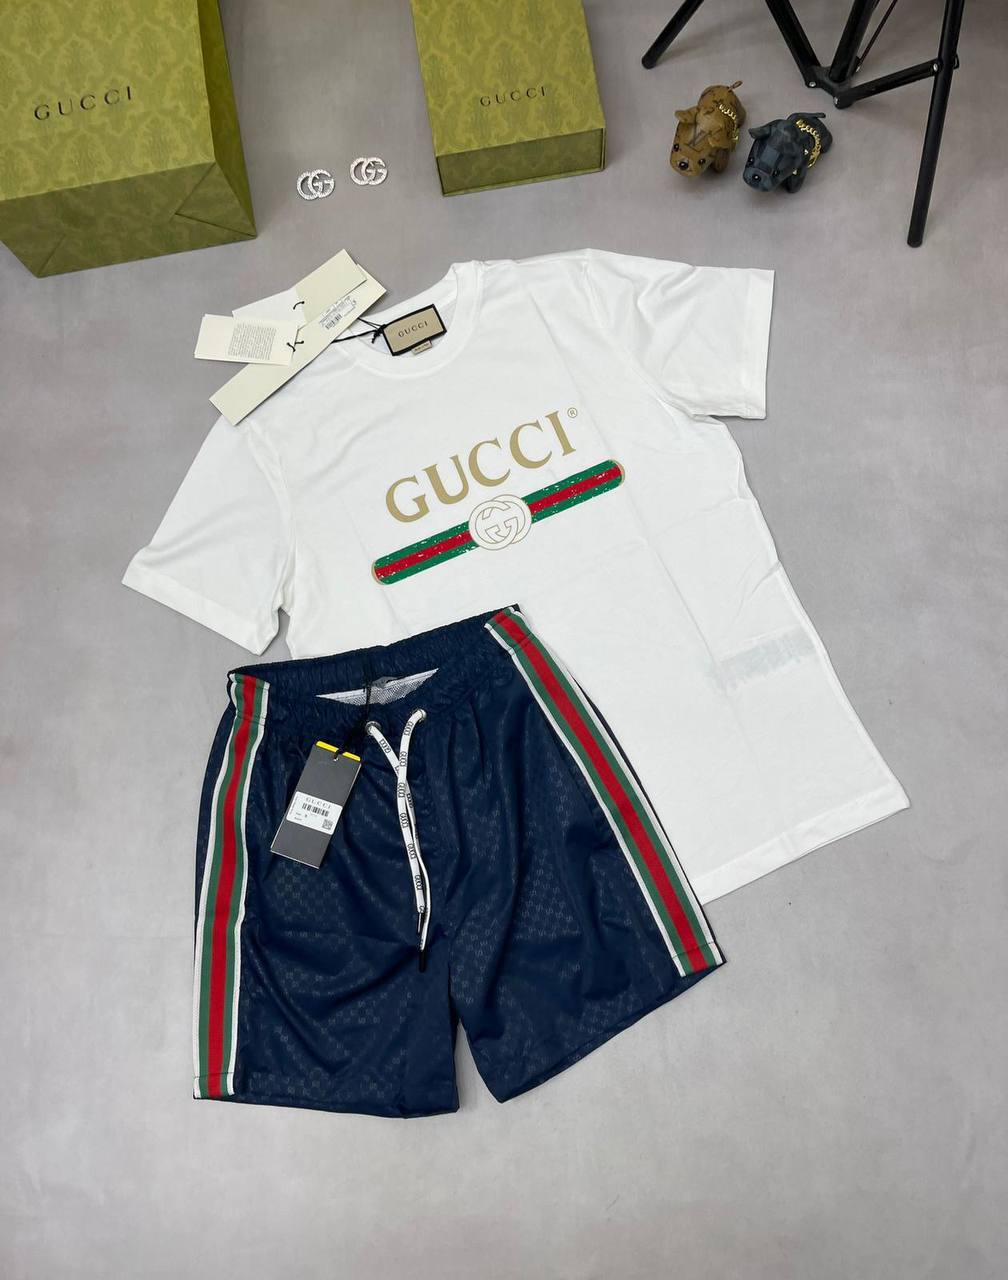 Gucci T-shirts and Shorts set in multiple colors